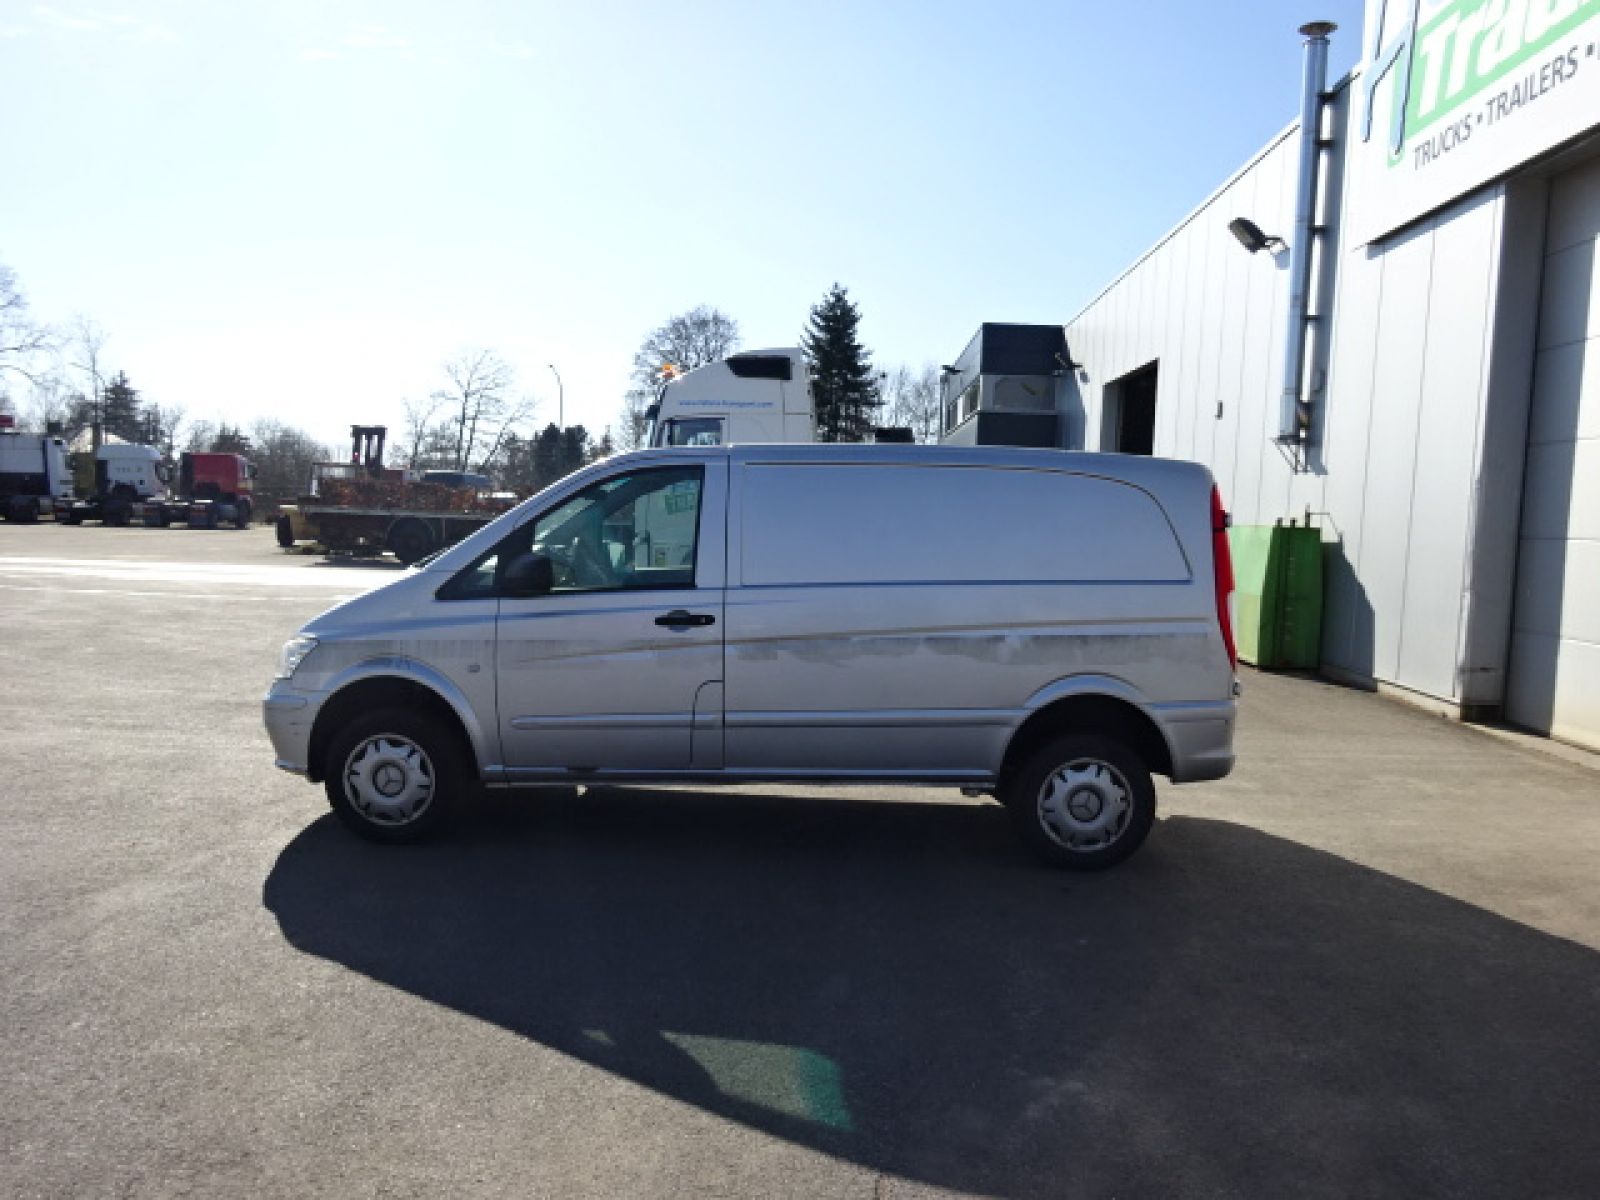 Second hand sale Diverse - MERCEDES VITO 113 cdi 113 CDI Fourgonnette (Belgique - Europe) - Houffalize Trading s.a.